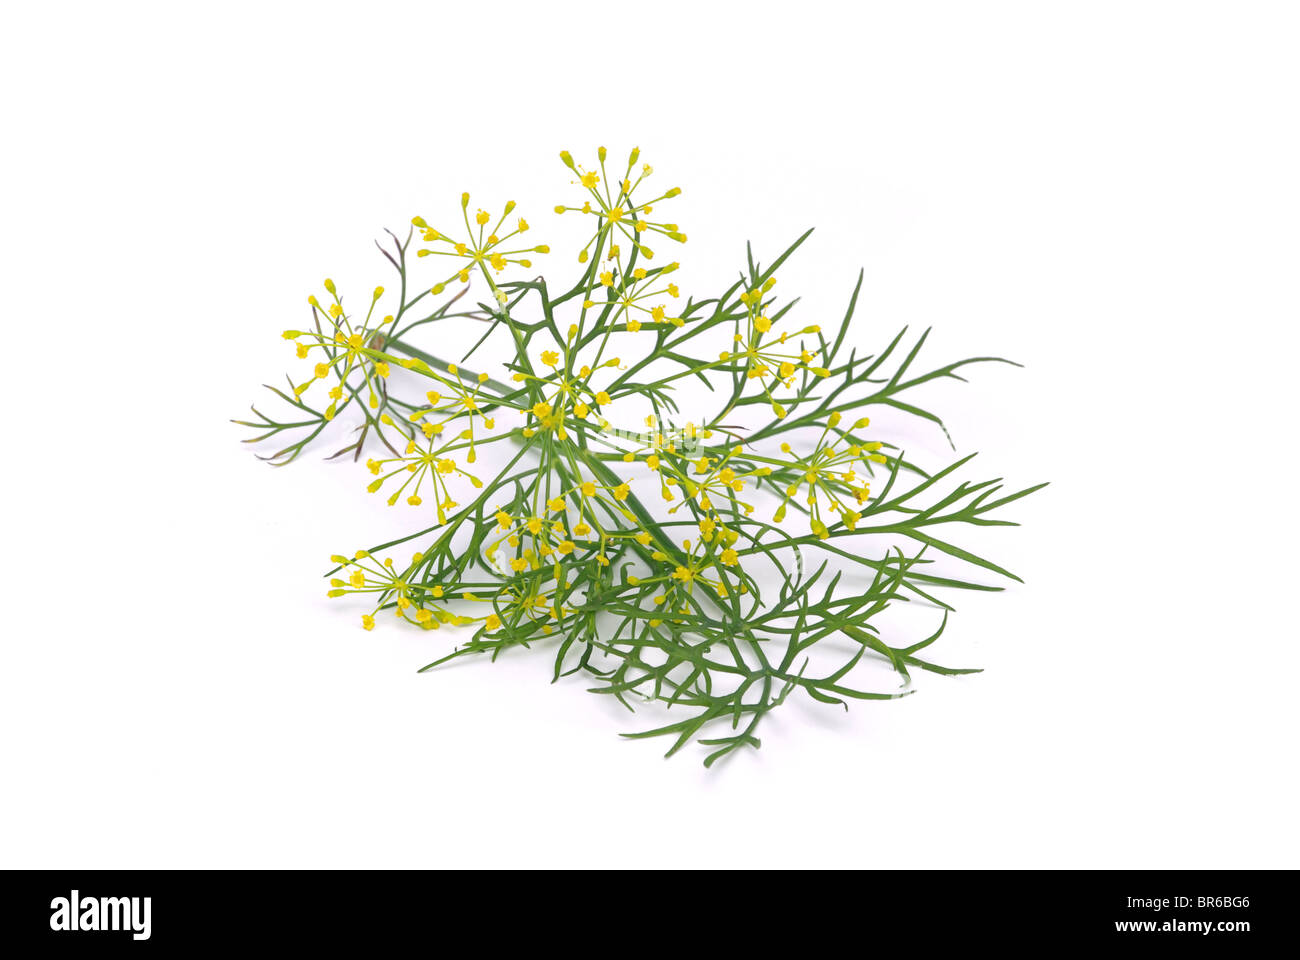 Dill freigestellt - dill isolated 01 Stock Photo